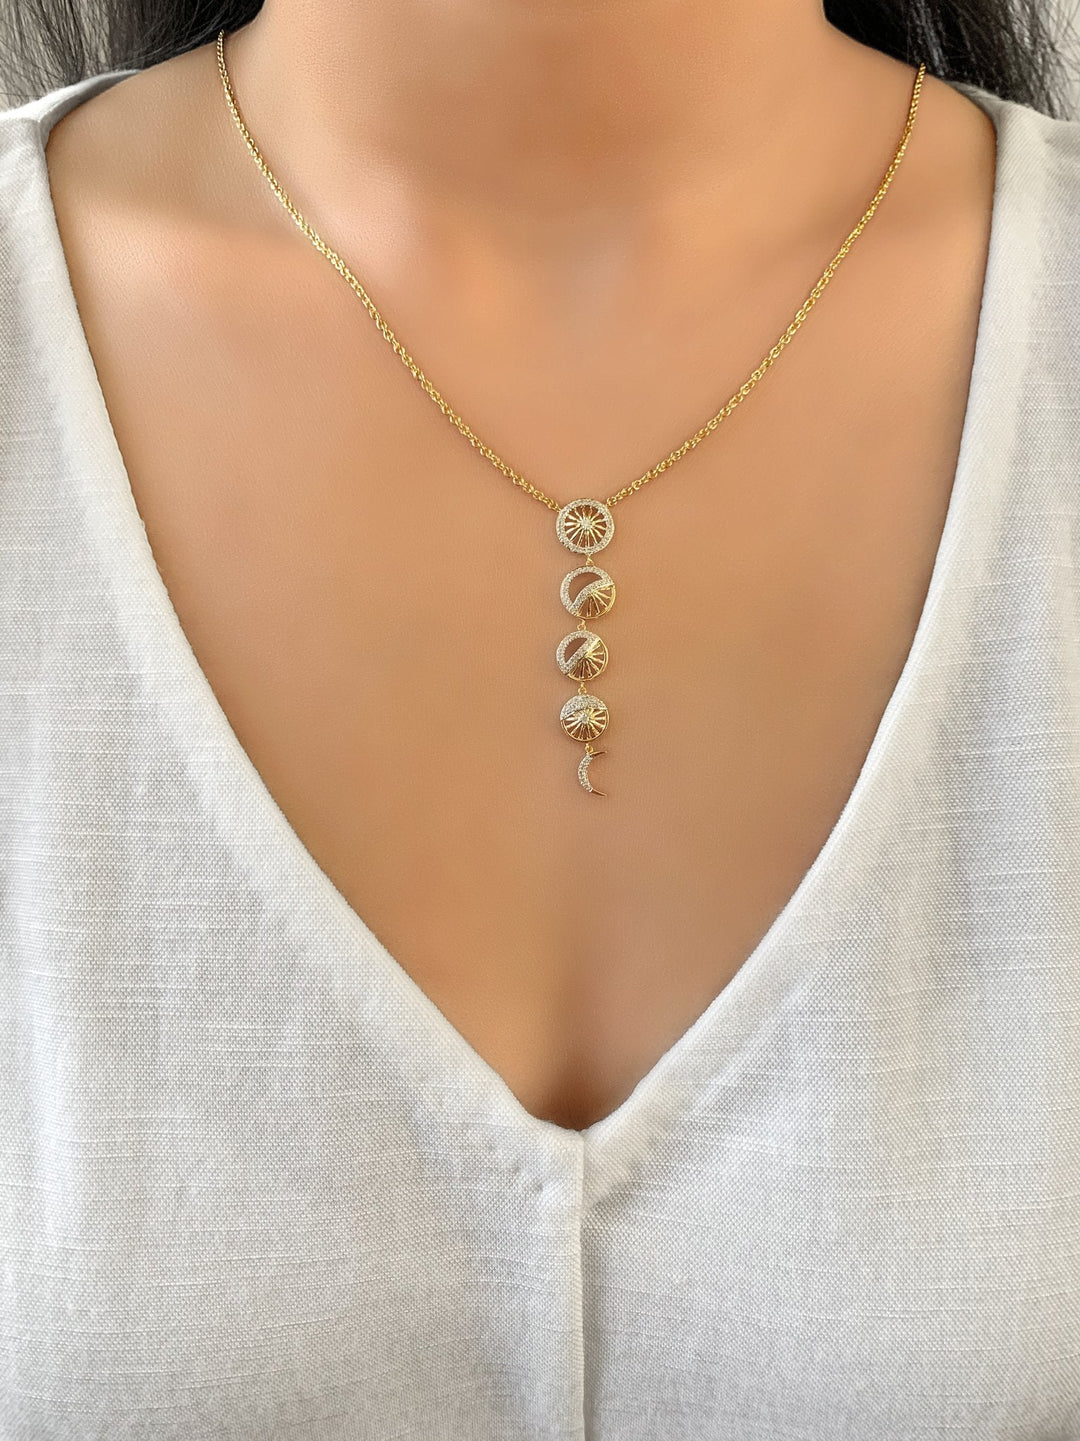 Moon Phases Diamond Necklace in 14K Yellow Gold